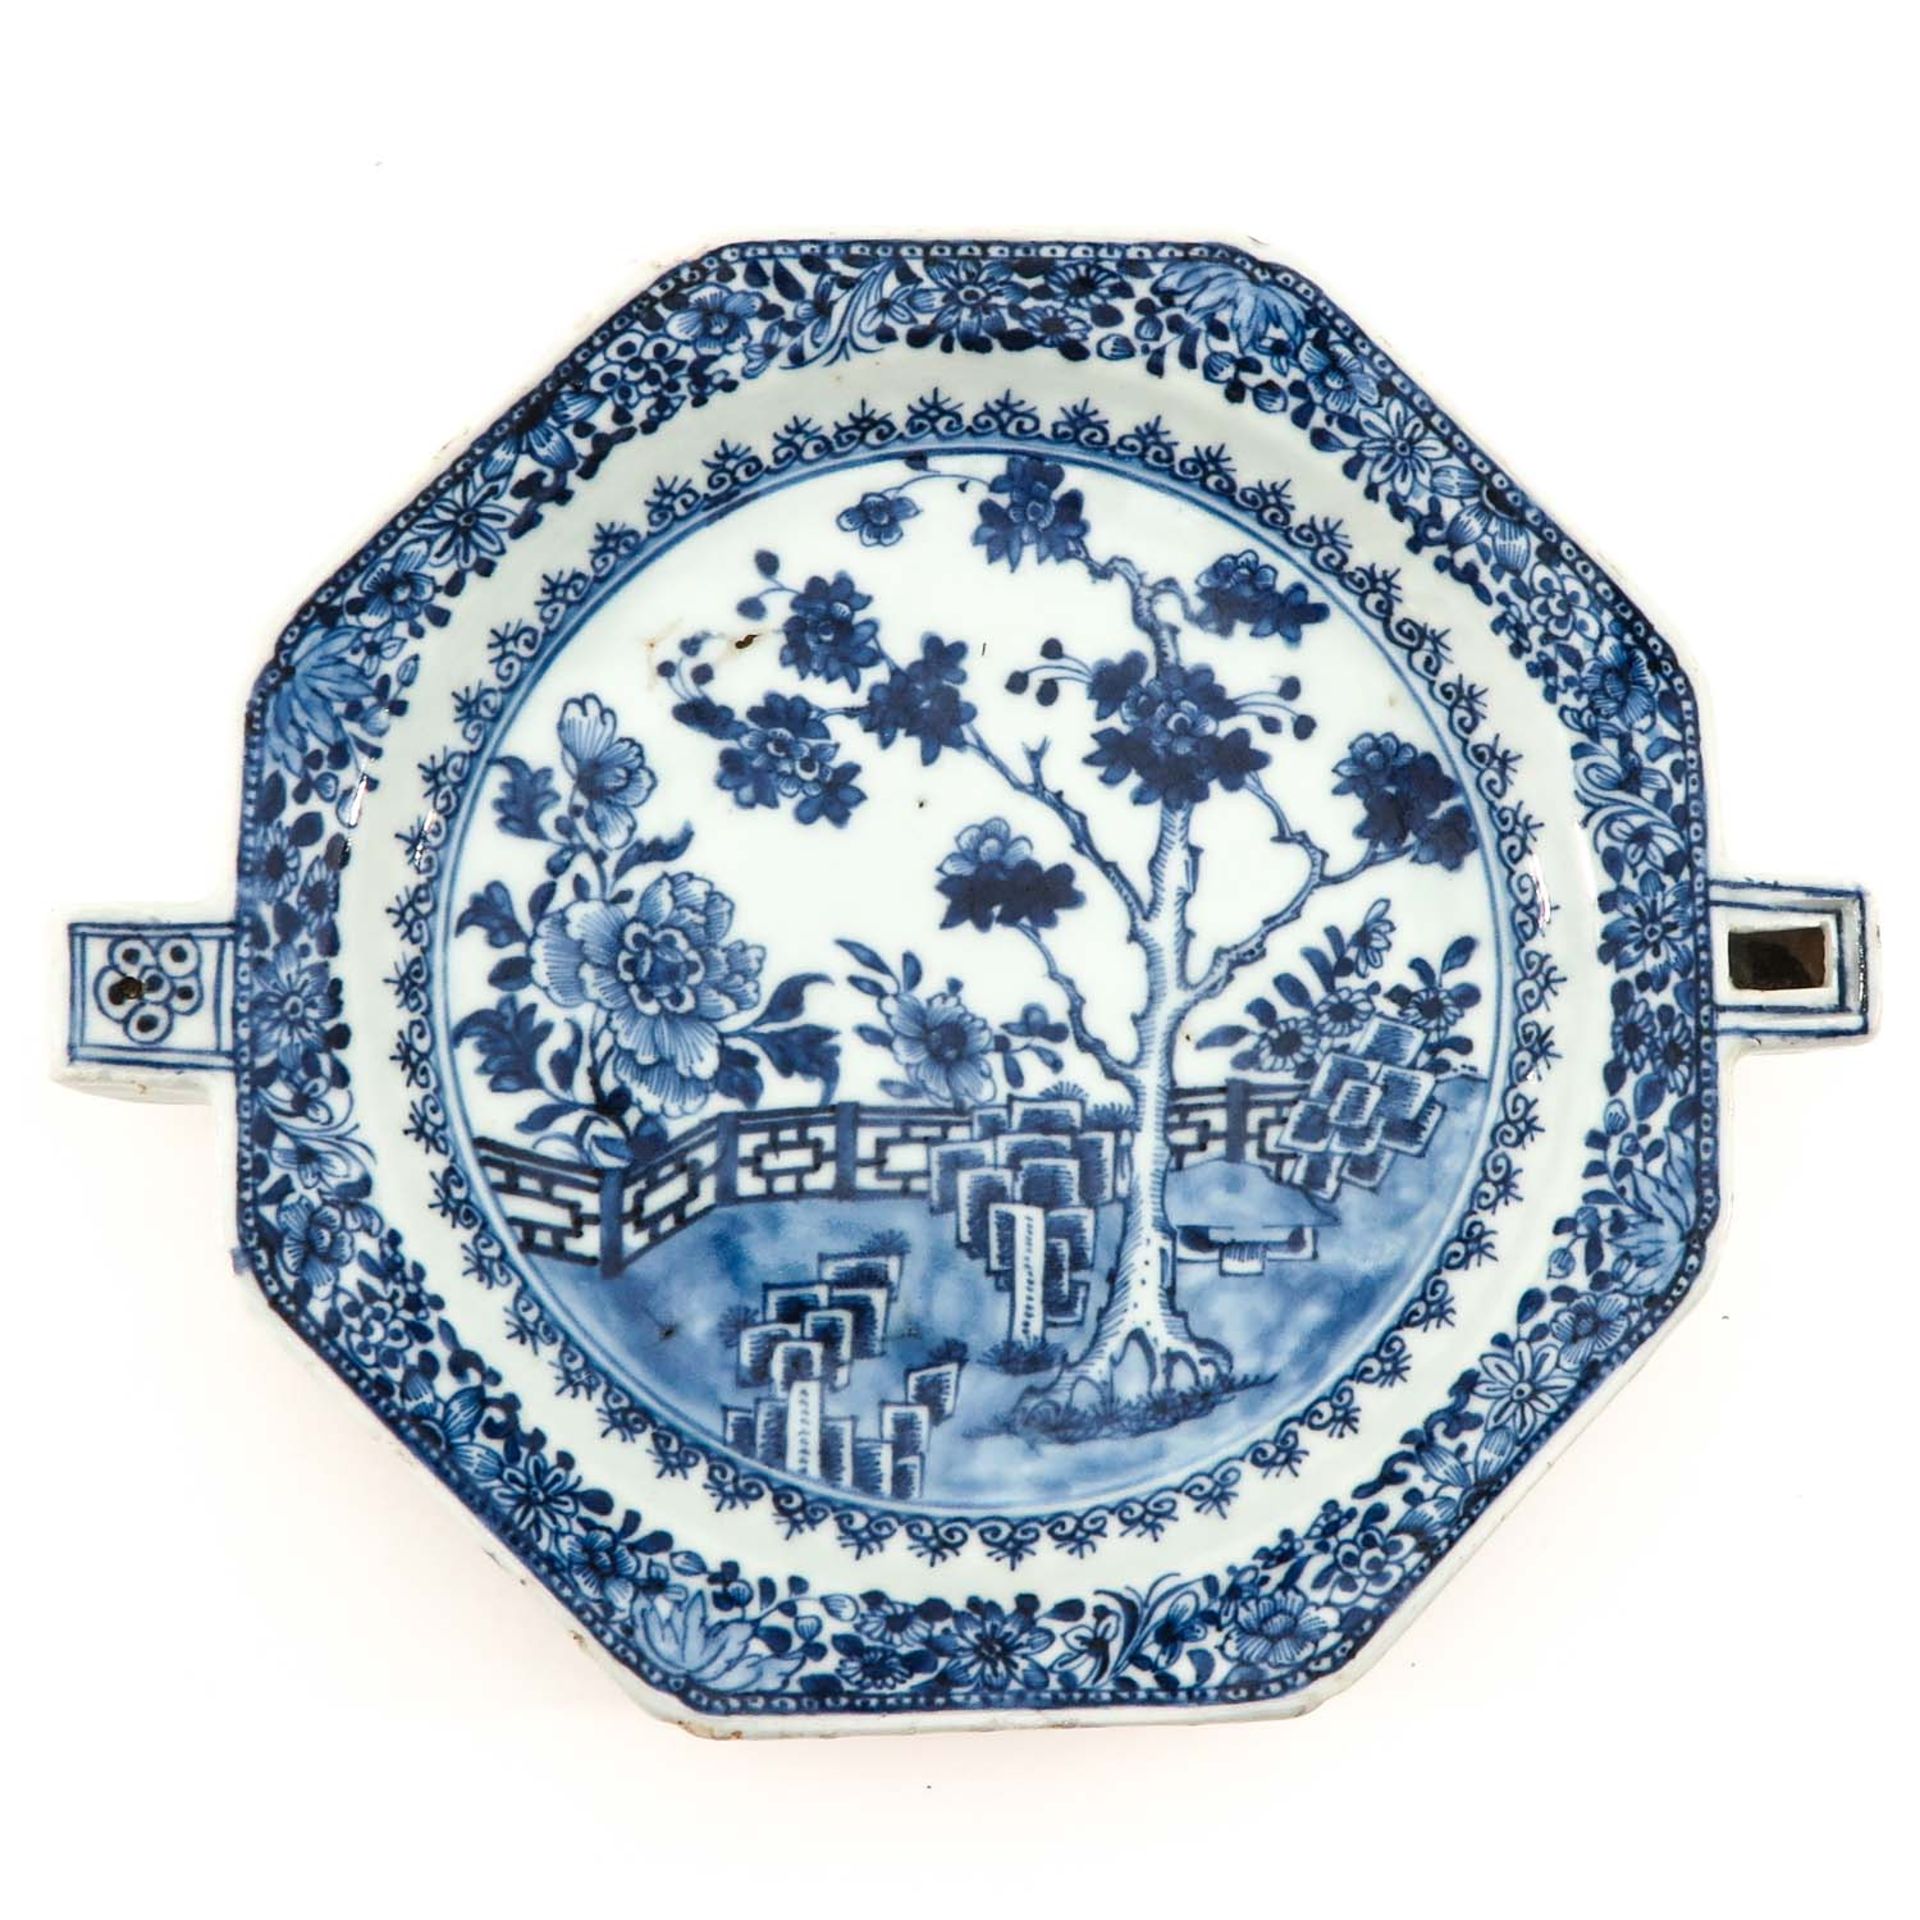 A Blue and White Warming Plate